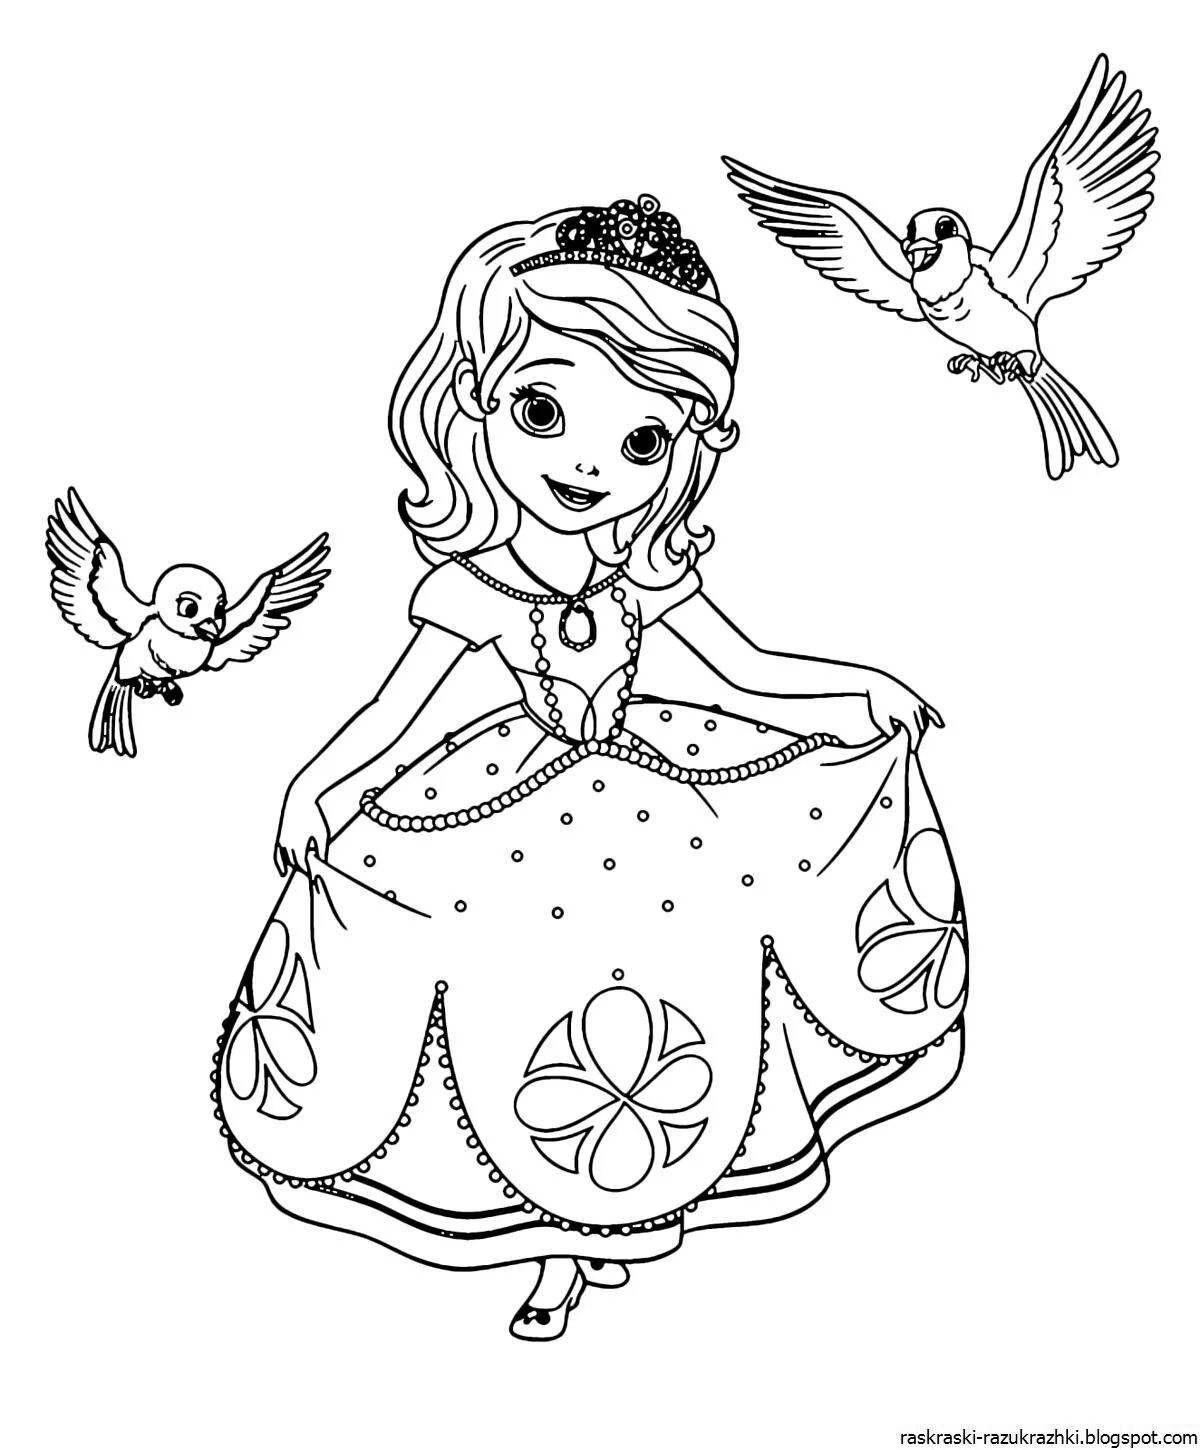 Fairytale coloring pages princesses for girls 6 years old